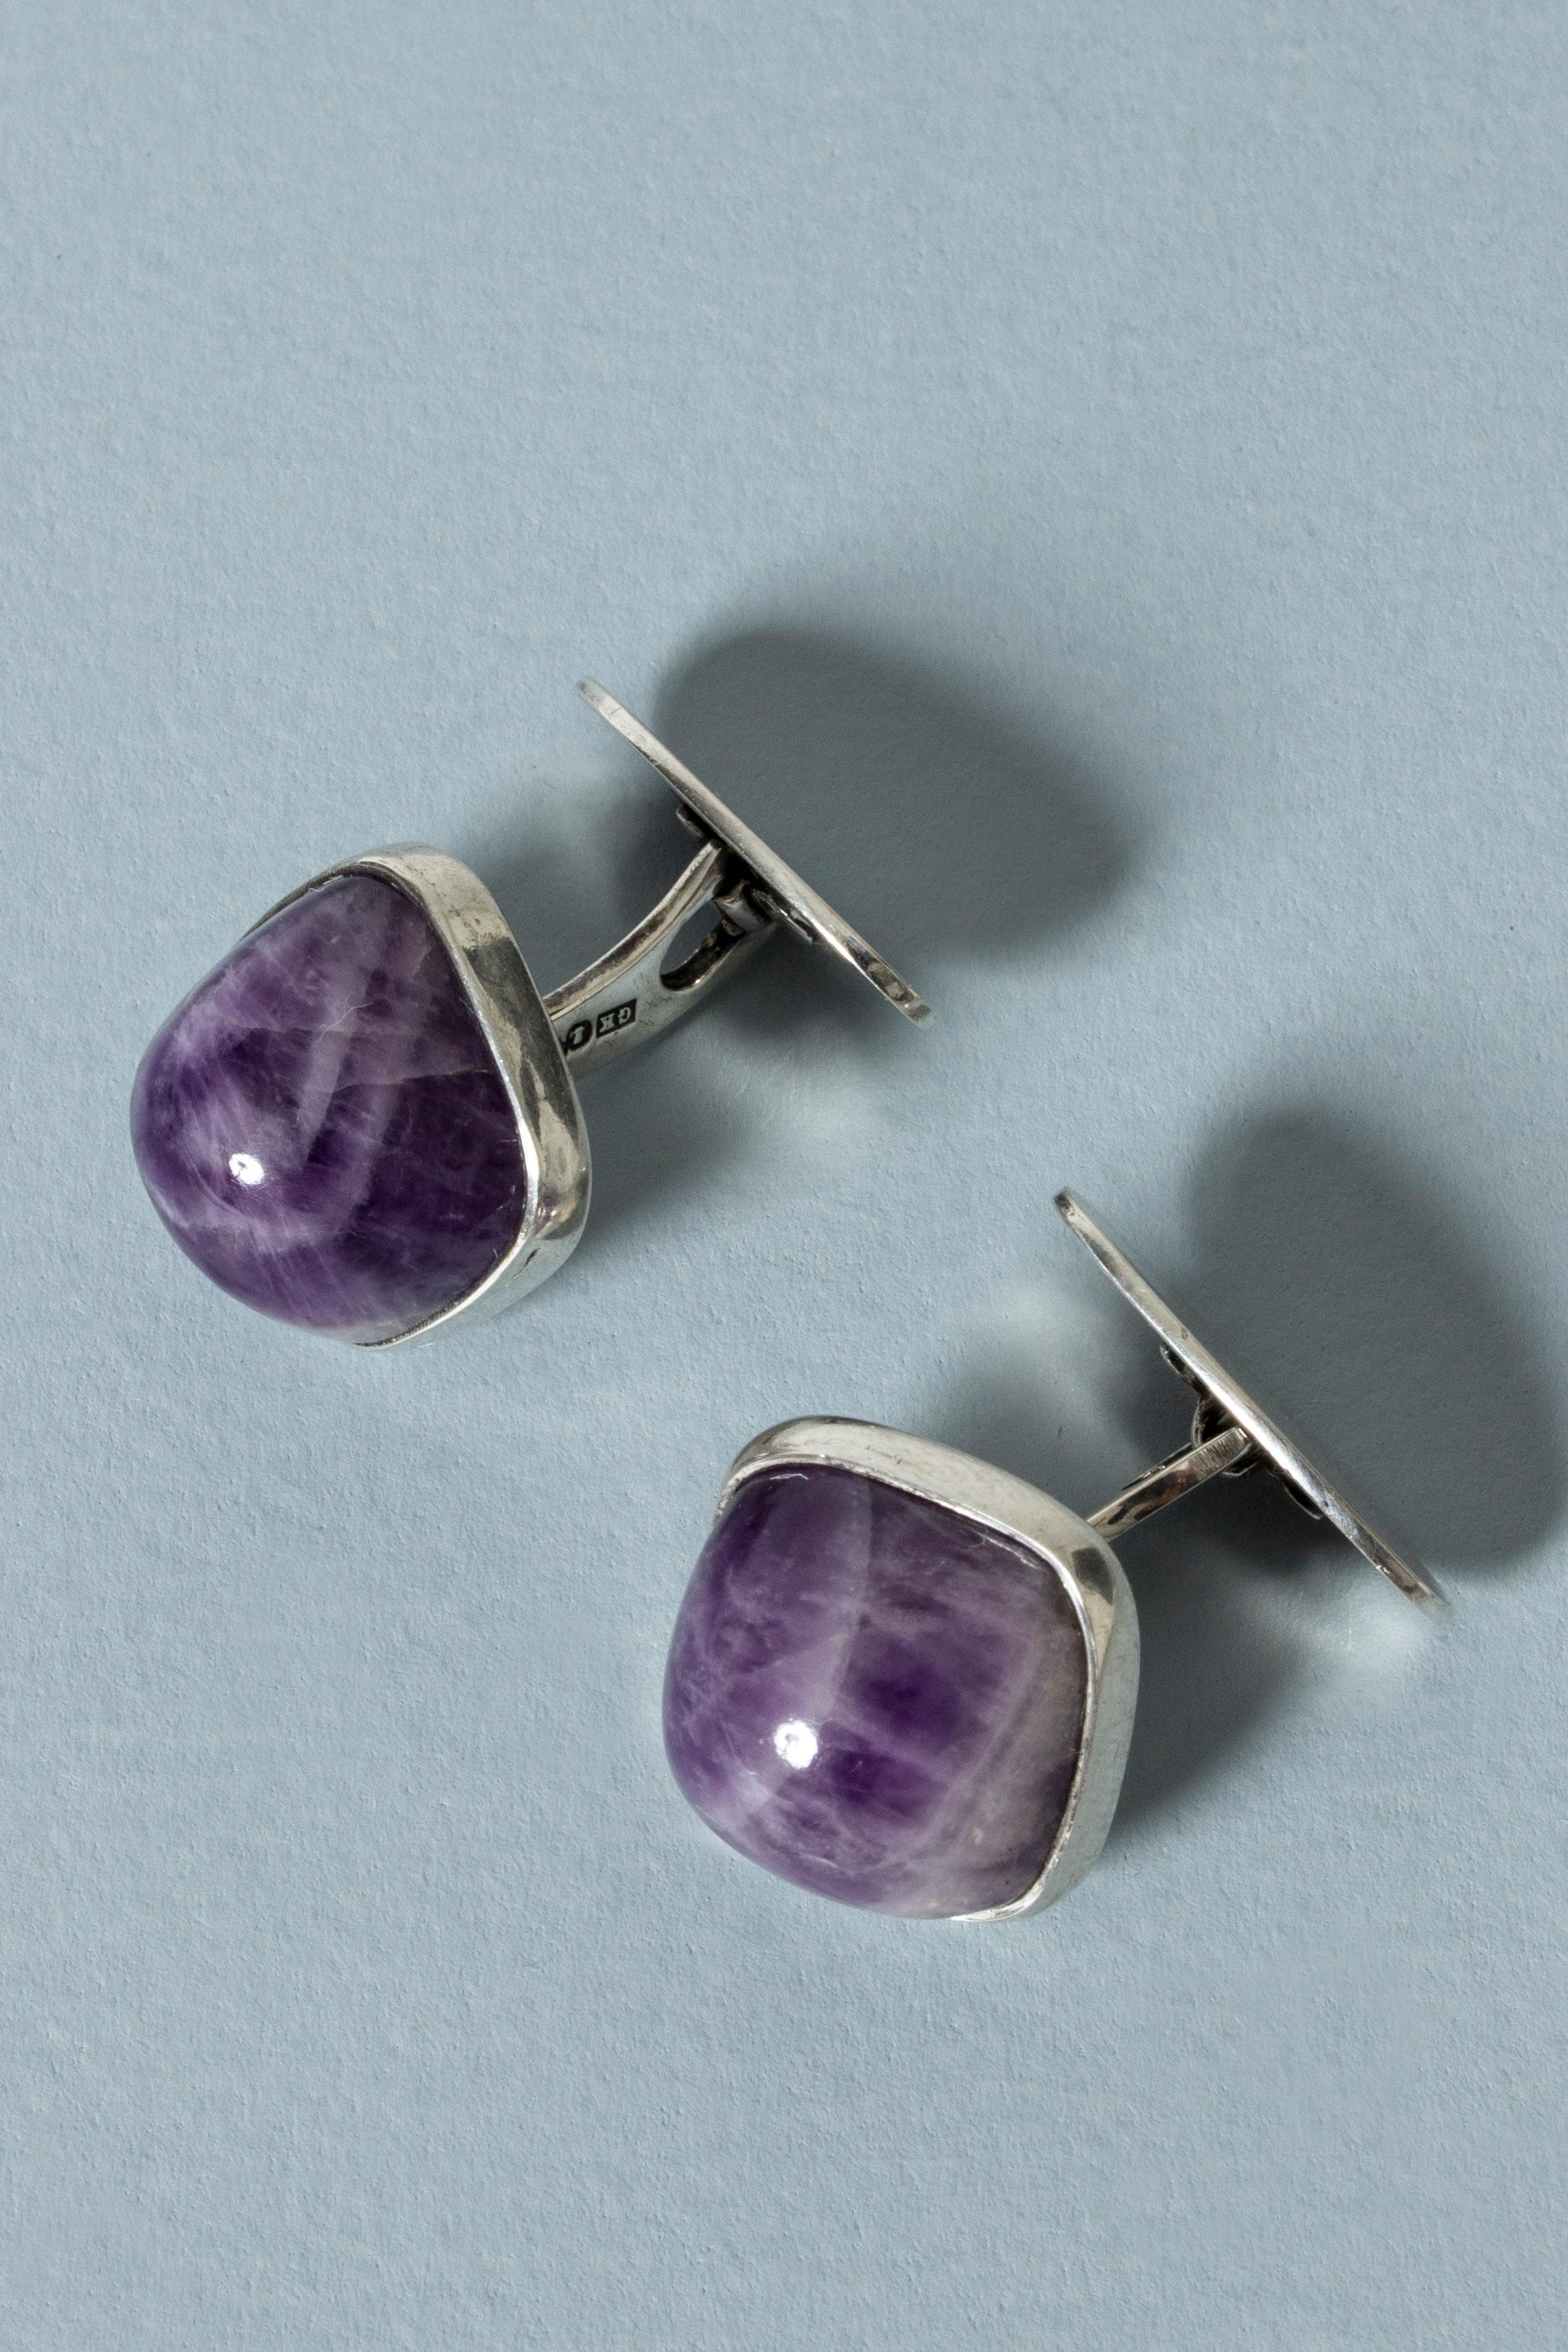 Cabochon Pair of Silver and Amethyst Cufflinks from Kaplans